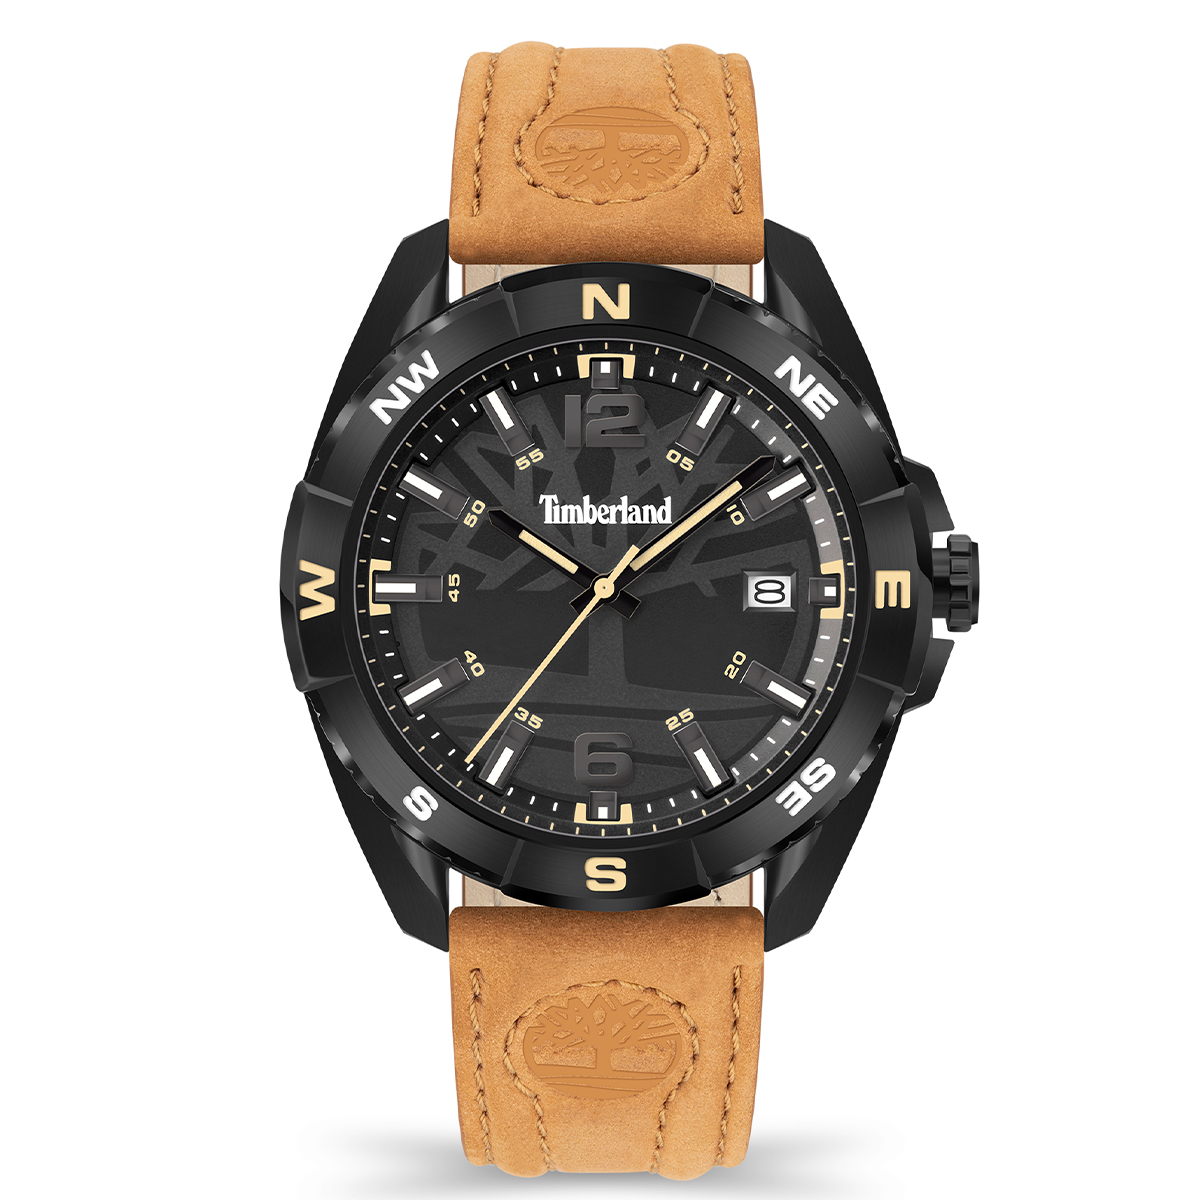 MONTRE TIMBERLAND HOMME SIMPLE CUIR